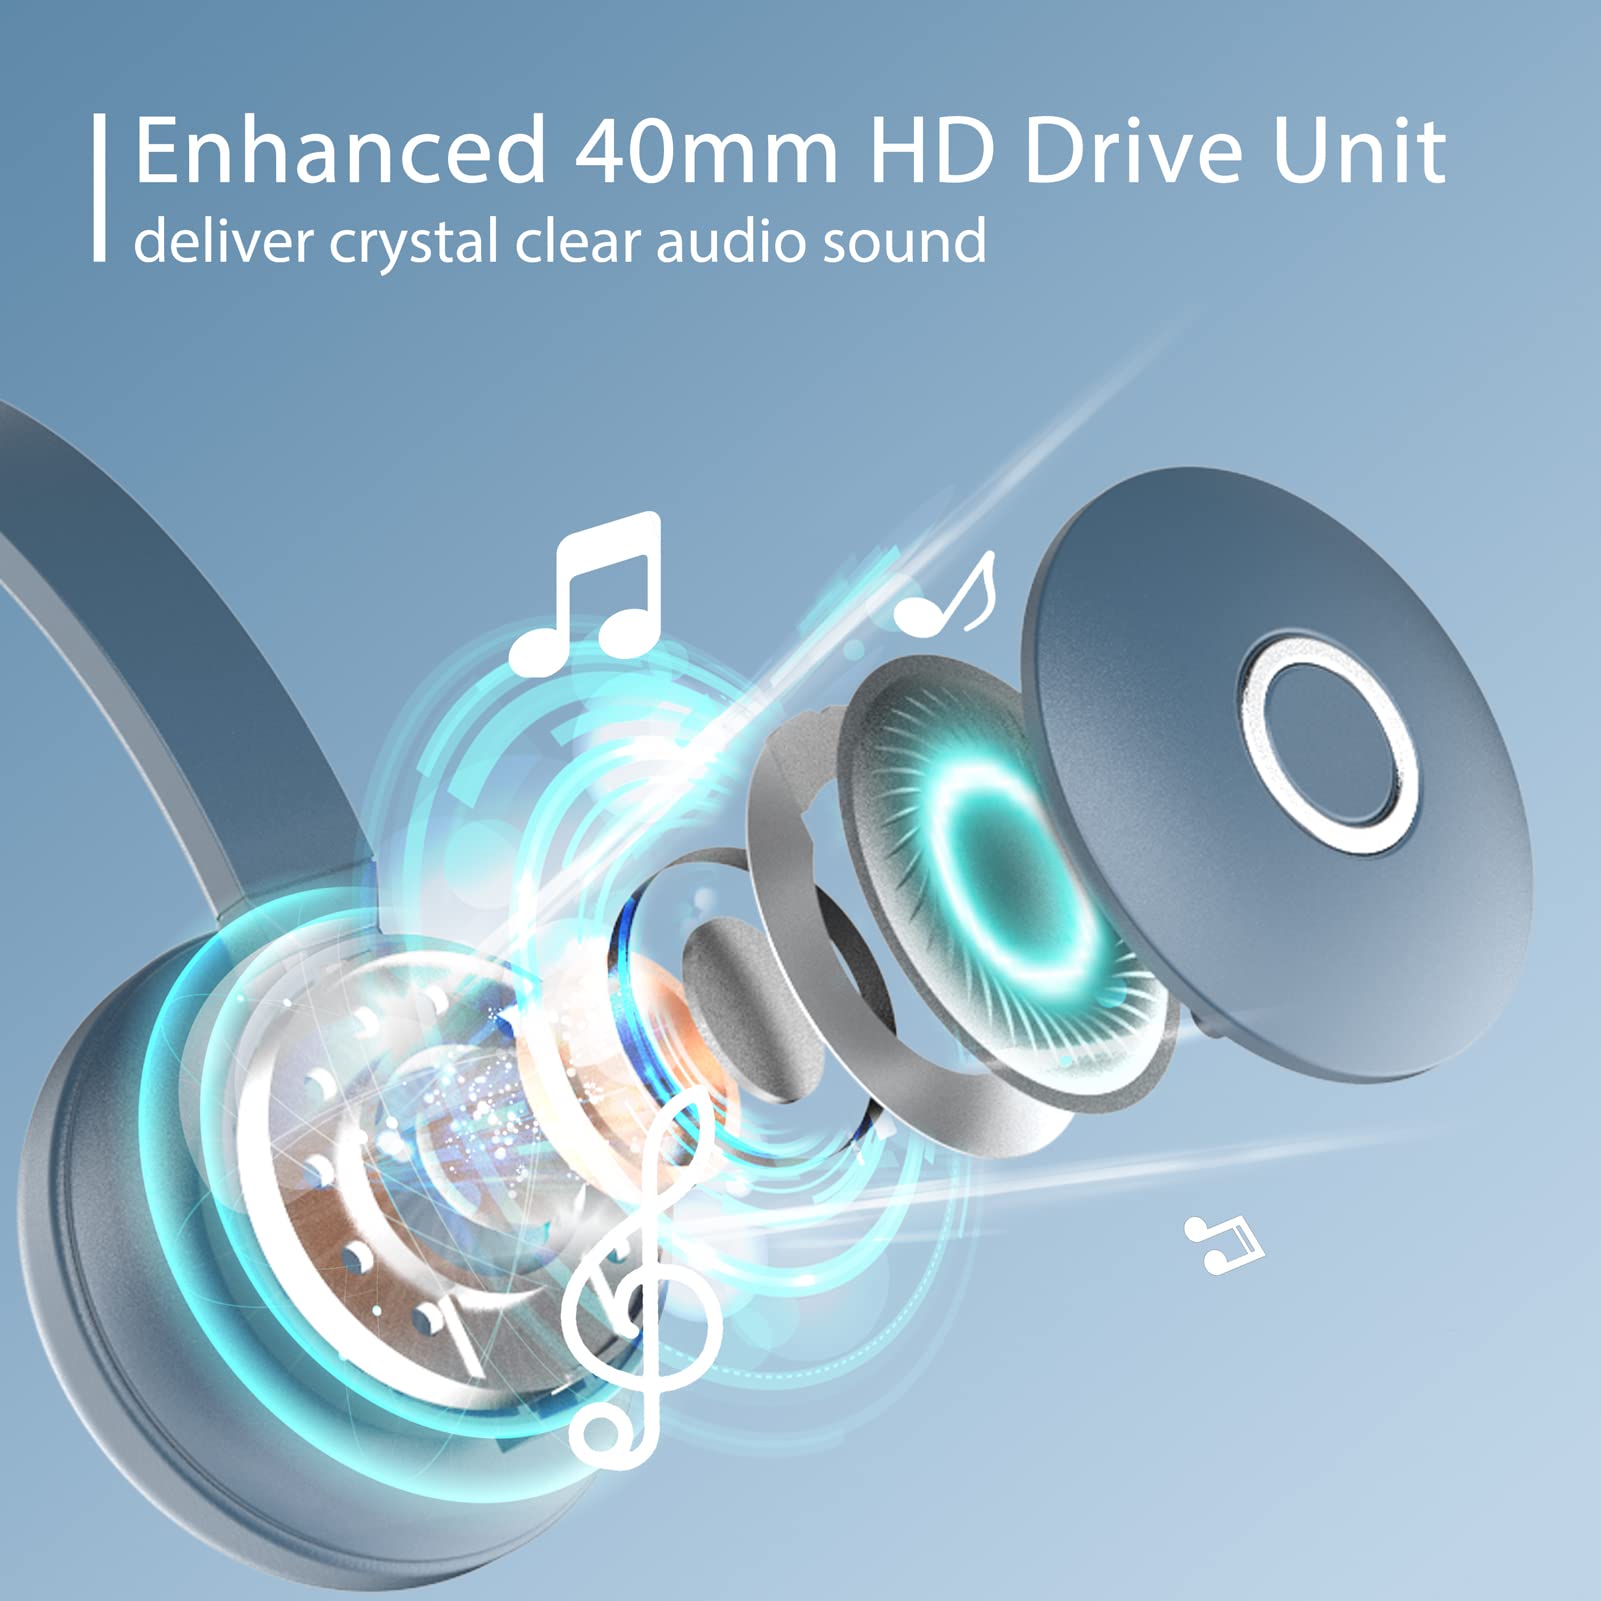 Enhanced 40mm HD drive unit deliver crystal clear audio sound.